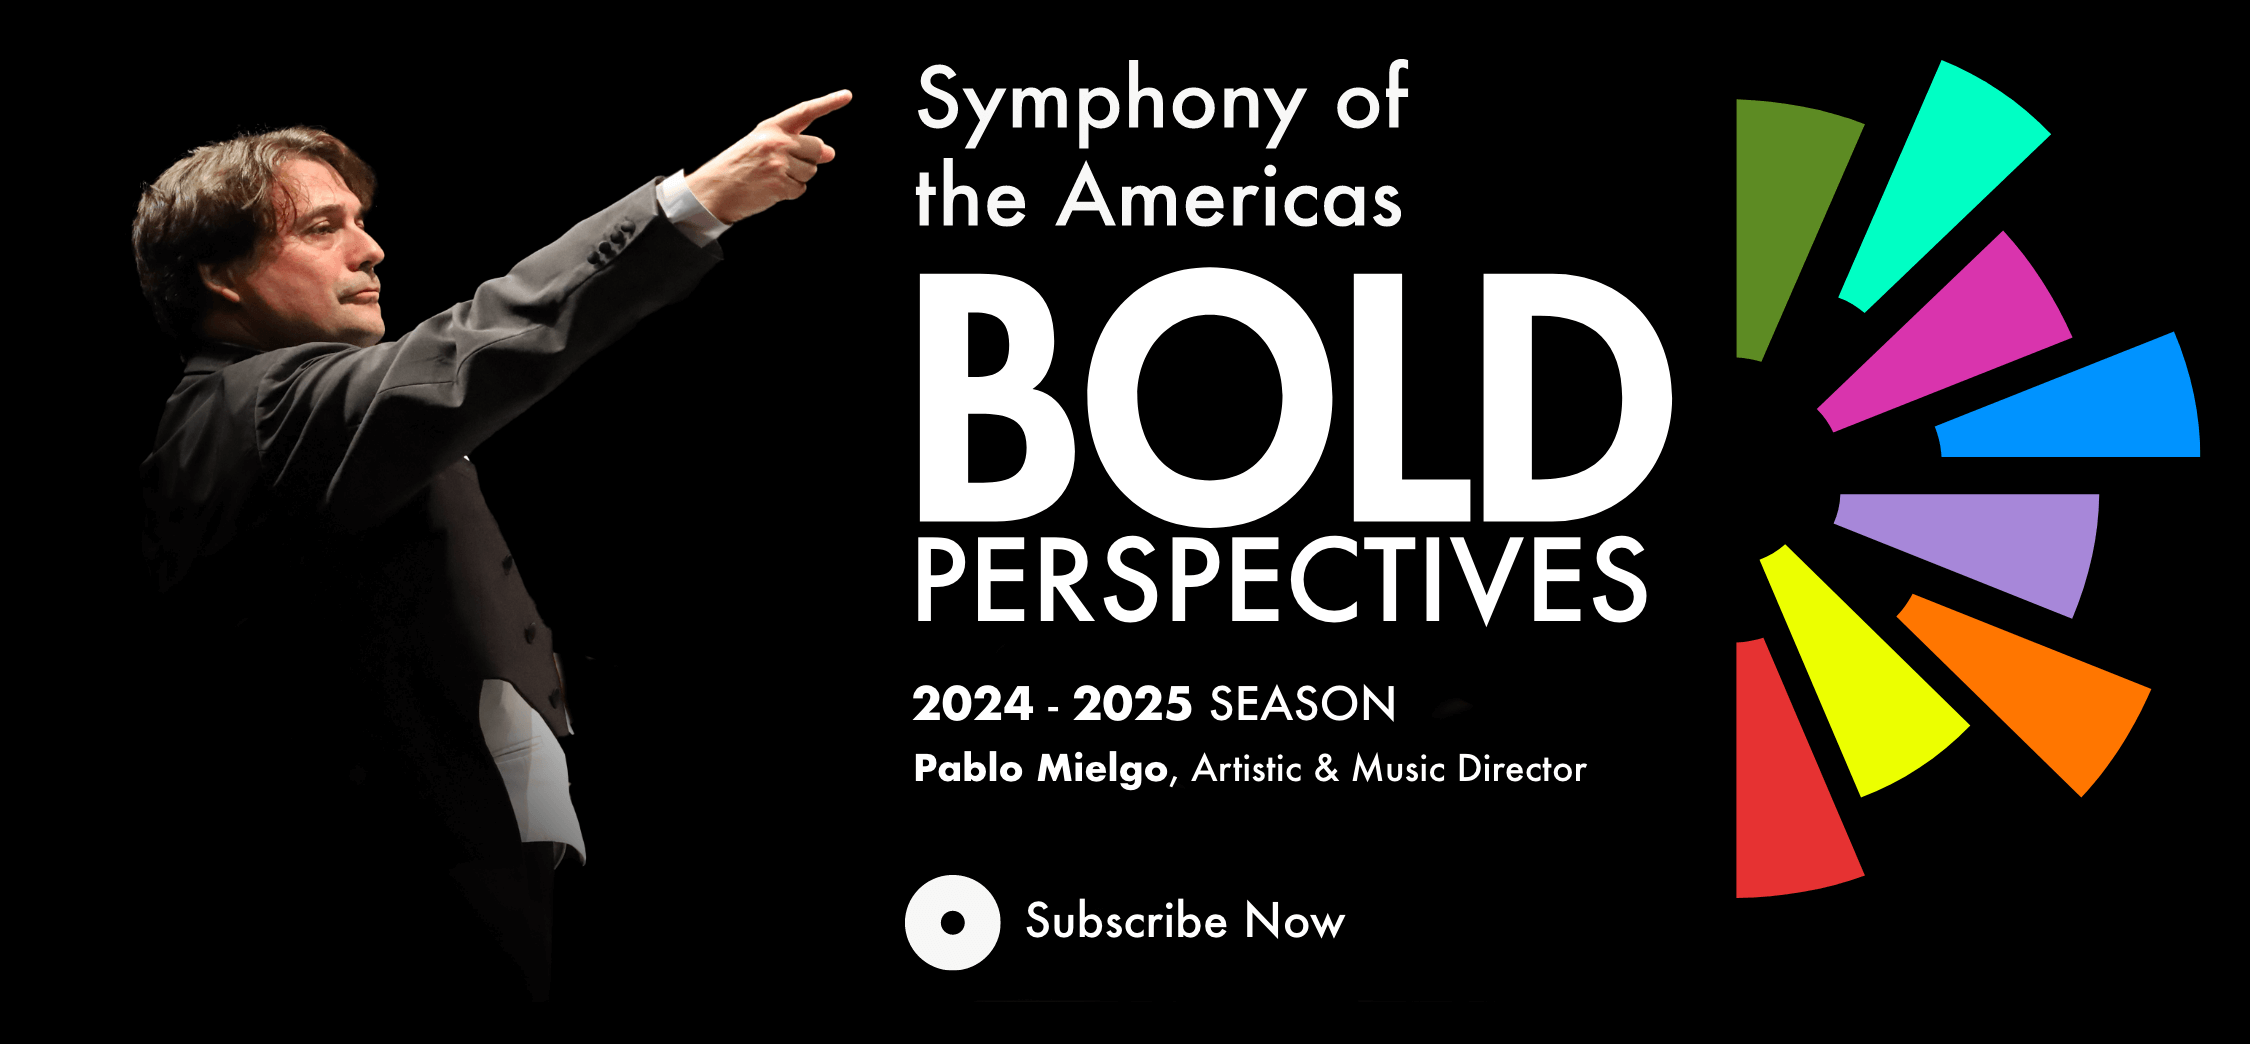 Symphony of the Americas 2024 - 2025 Season Announced Subscribe now!